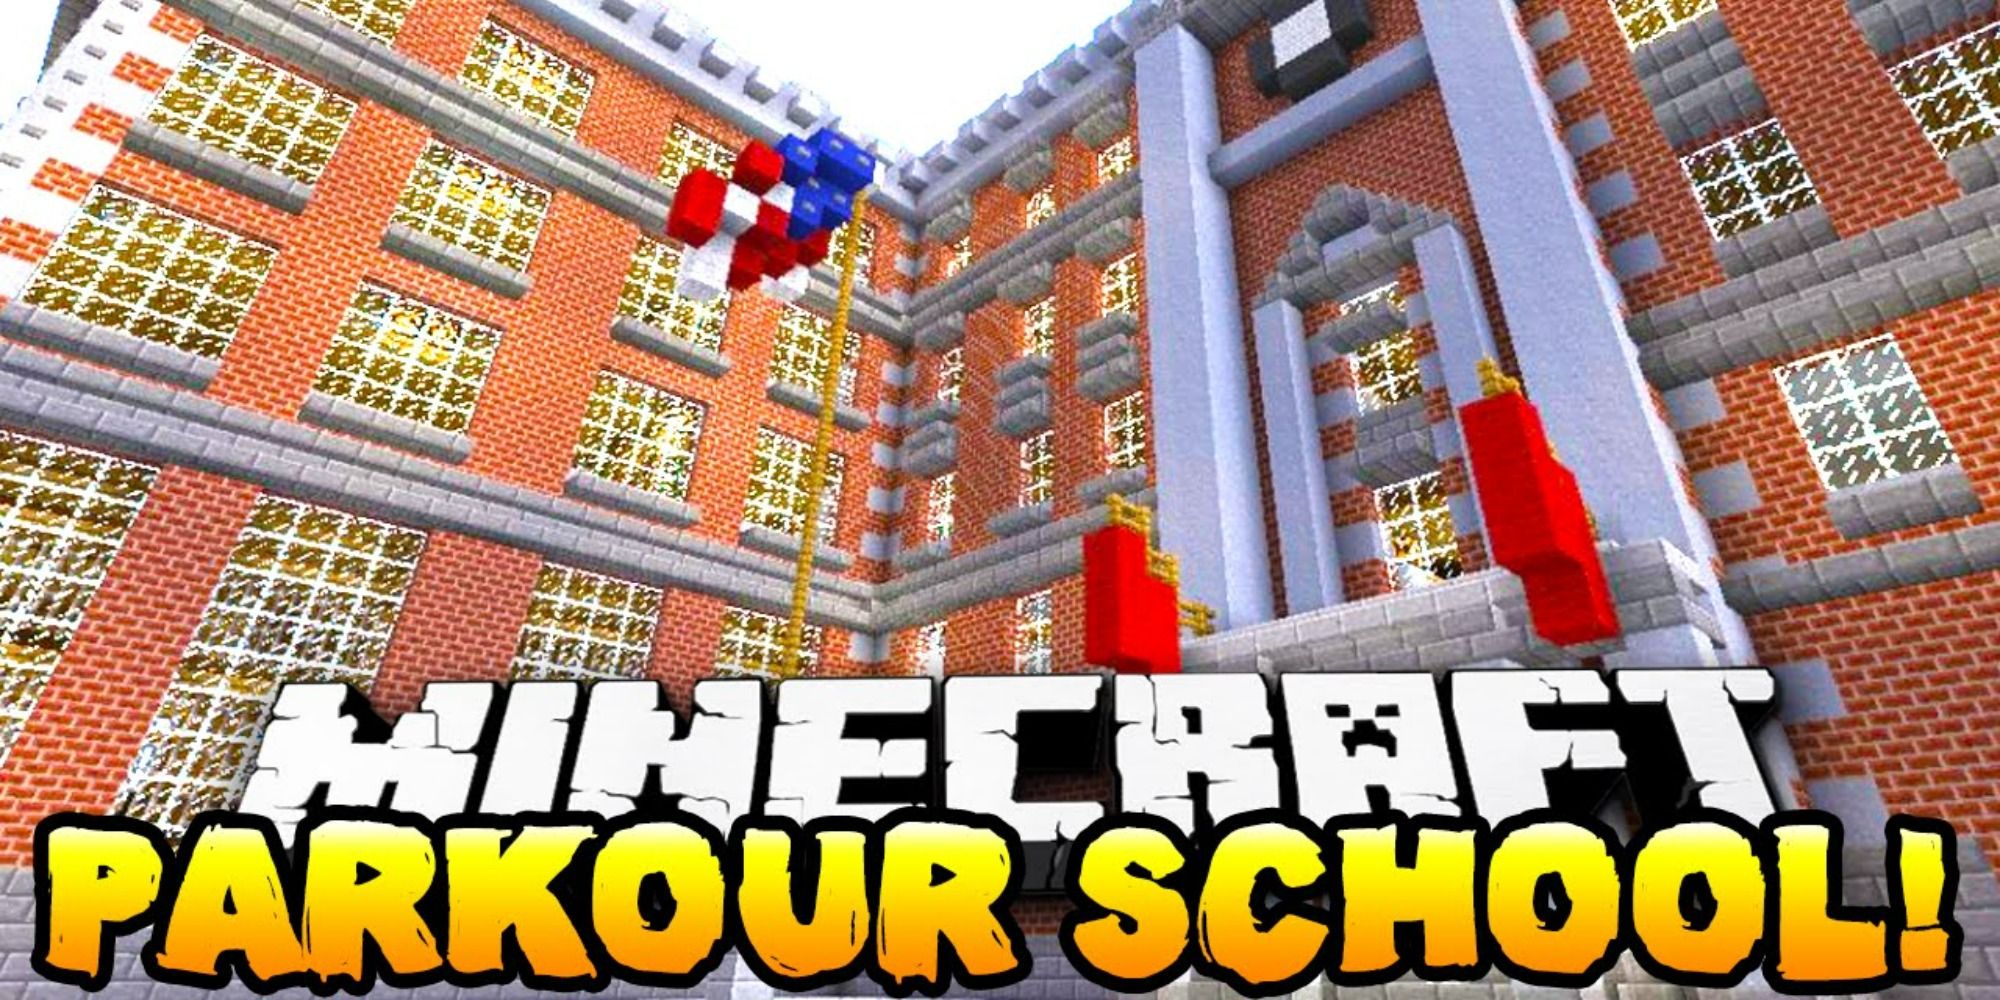 The exterior of the Minecraft Parkour School